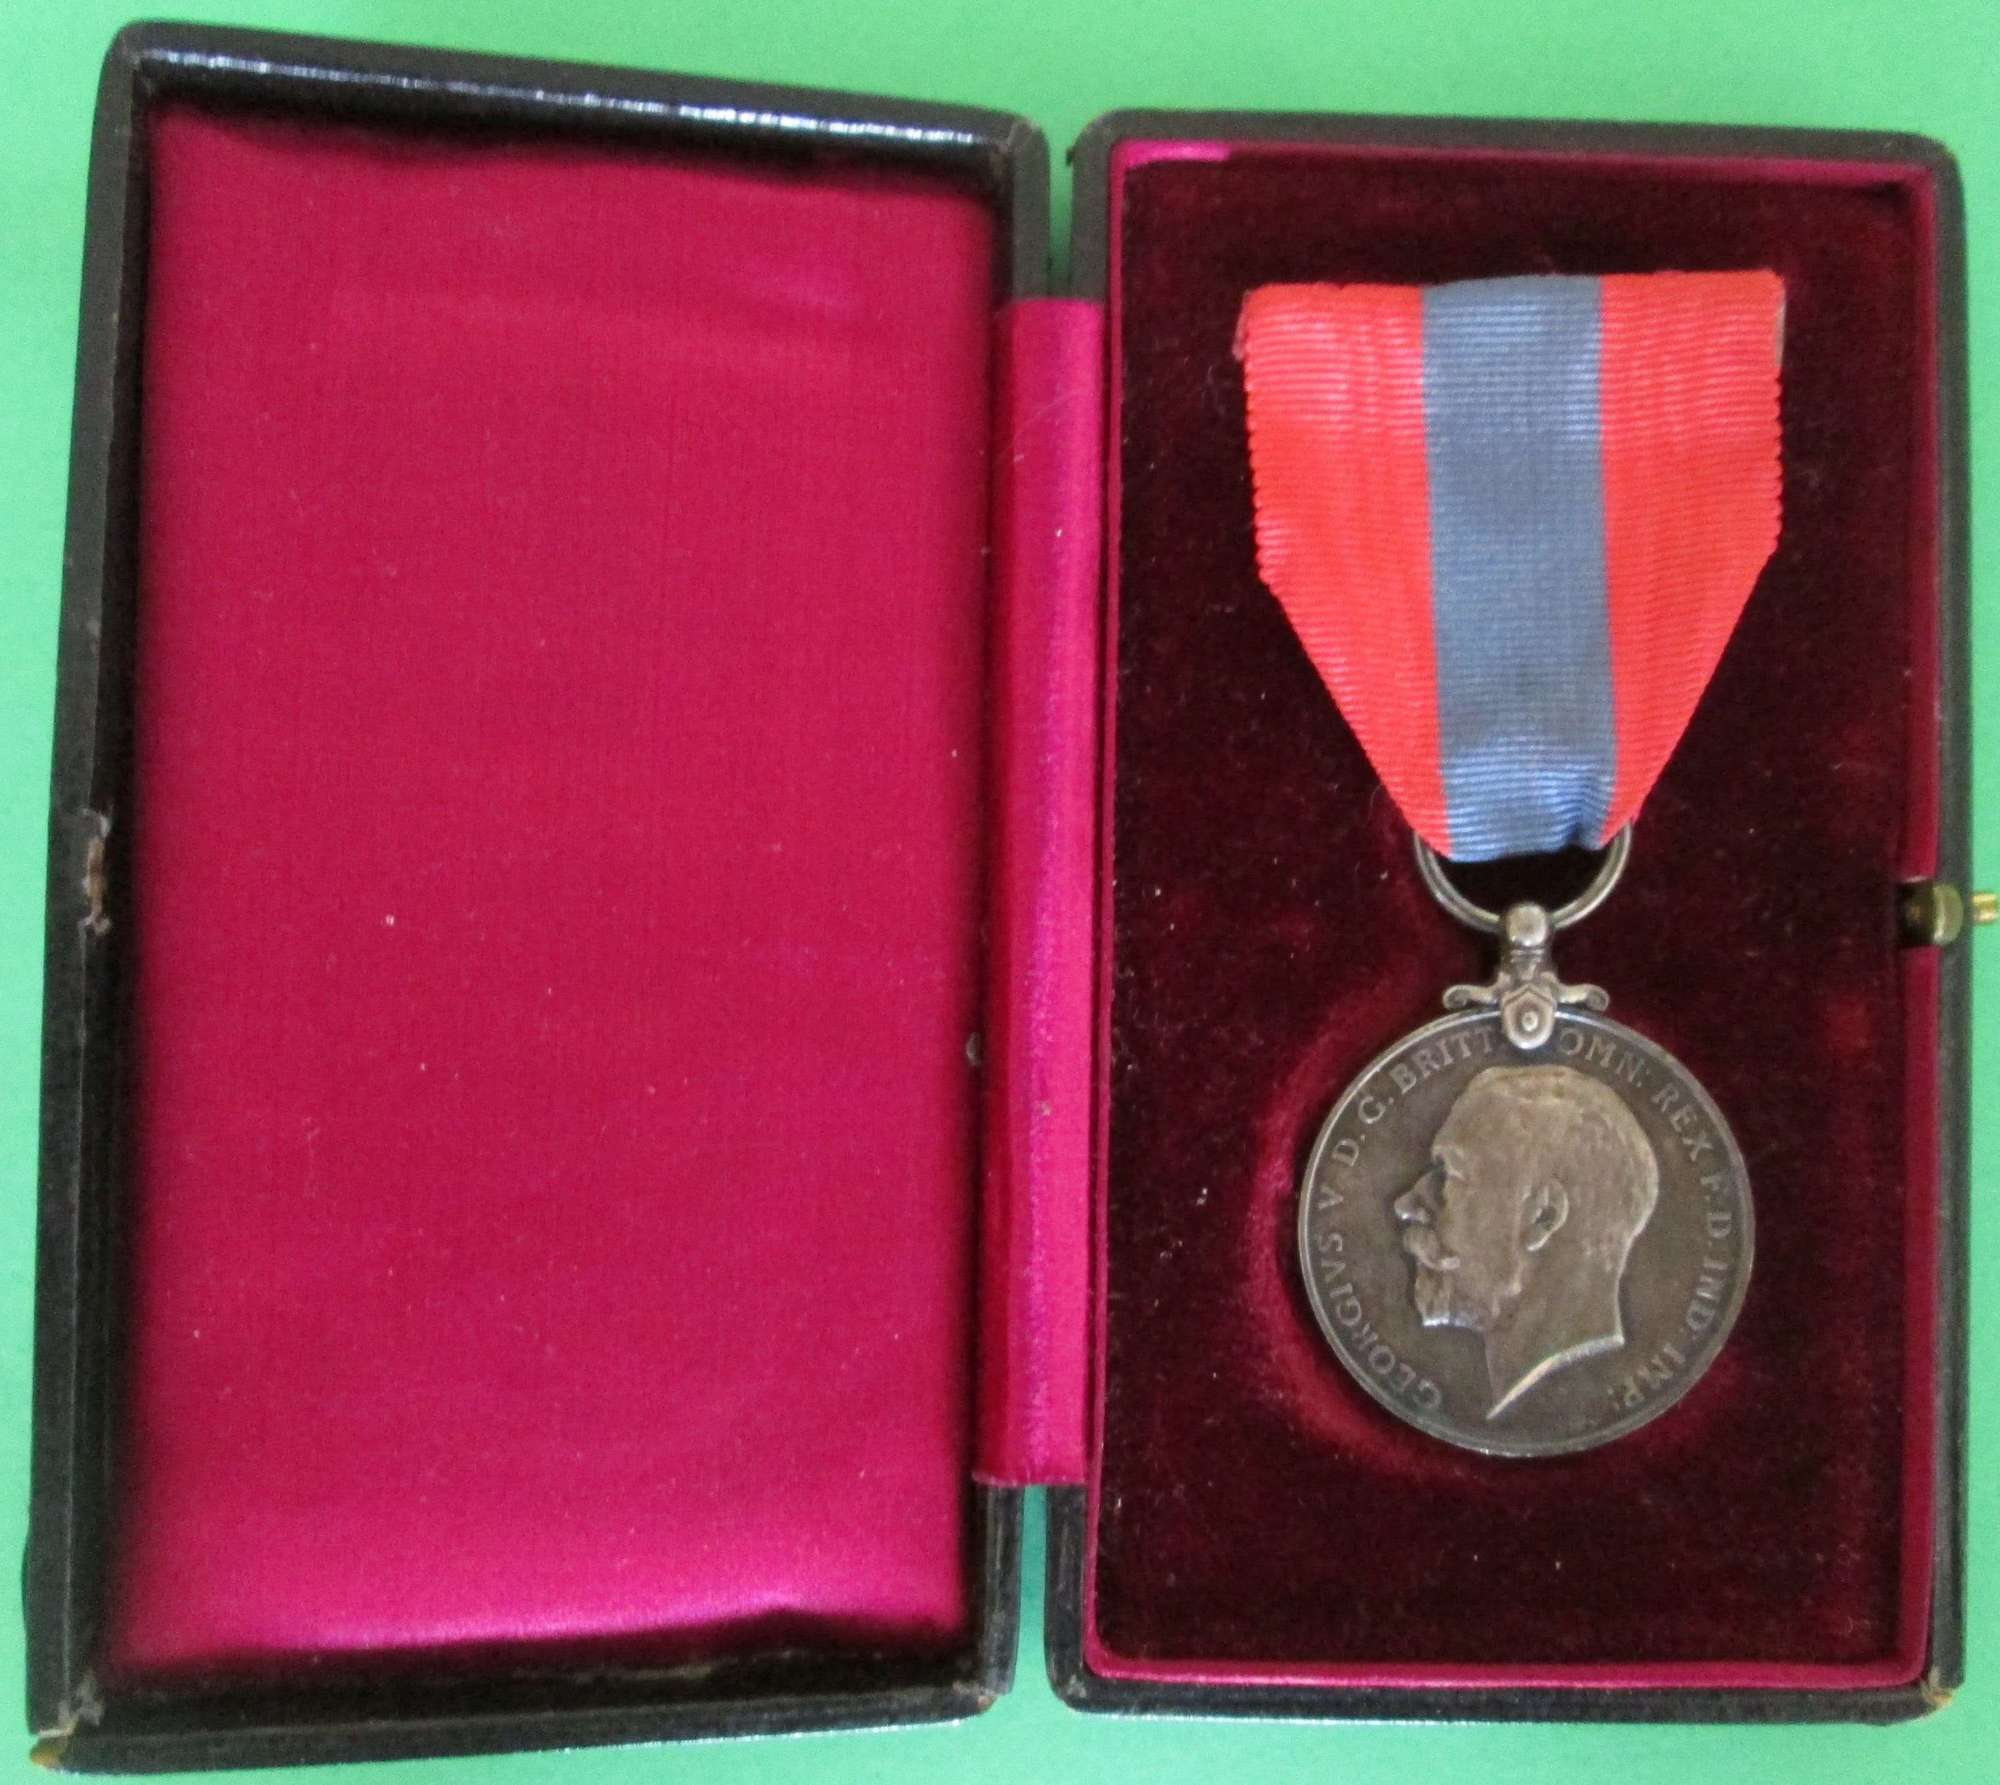 A ISM MEDAL AWARDED TO WILLIAM HARRY FRAMPTON AUG 1927 AWARD POSTMAN